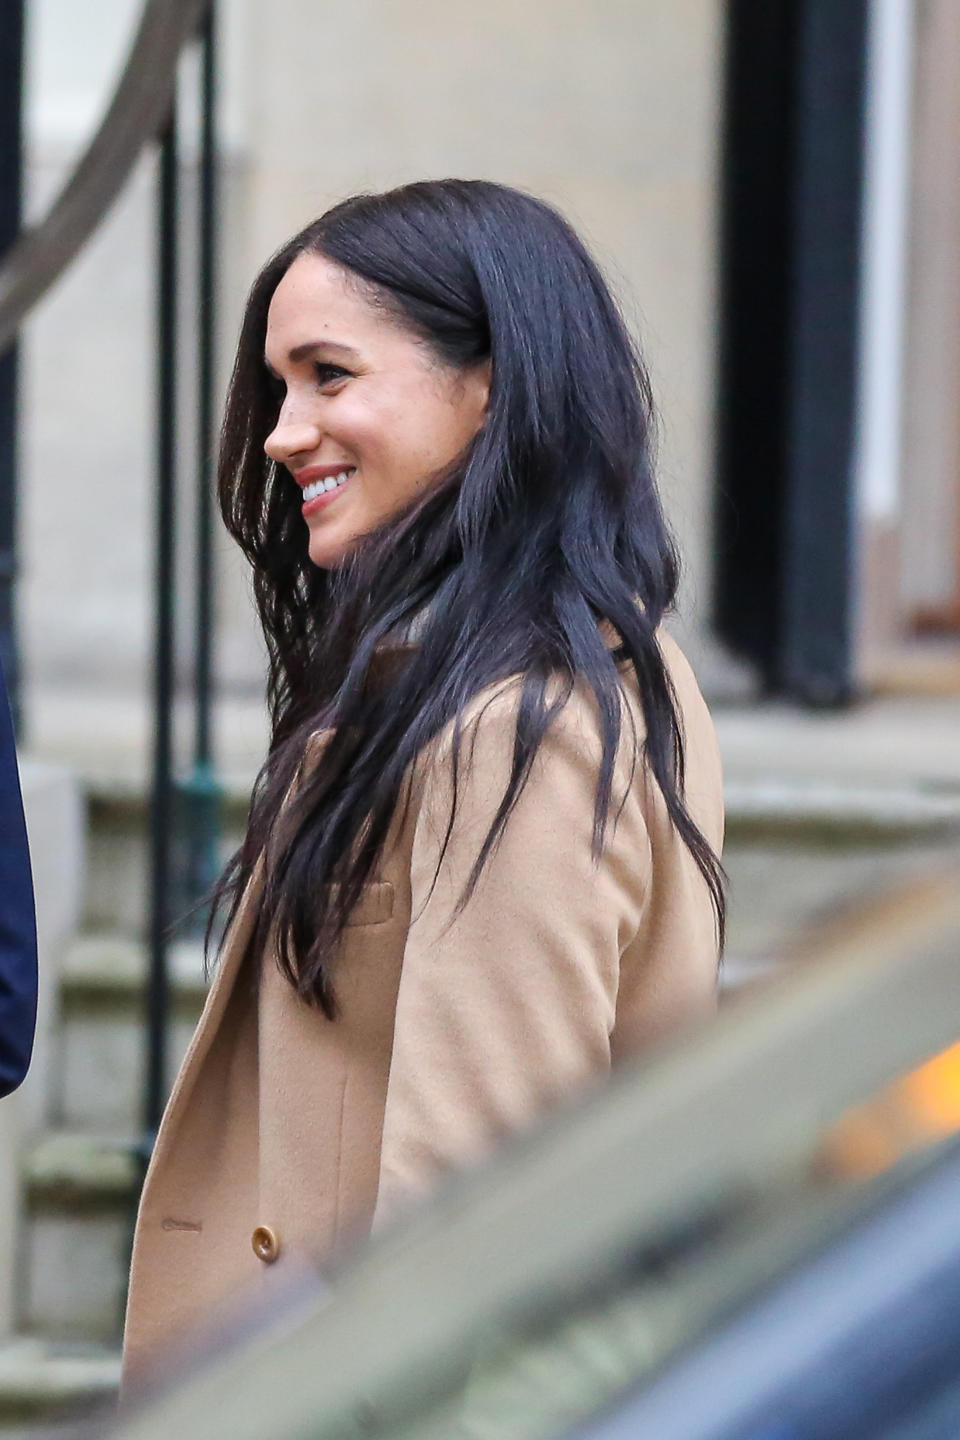 Meghan, Duchess of Sussex arrives at Canada House in London. Prince Harry, Duke of Sussex and Meghan Duchess of Sussex met Canada's High Commissioner for Canada in the UK, Janice Charette thanking her for the warm Canadian hospitality and support they received during their recent stay in Canada. (Photo by Steve Taylor / SOPA Images/Sipa USA)